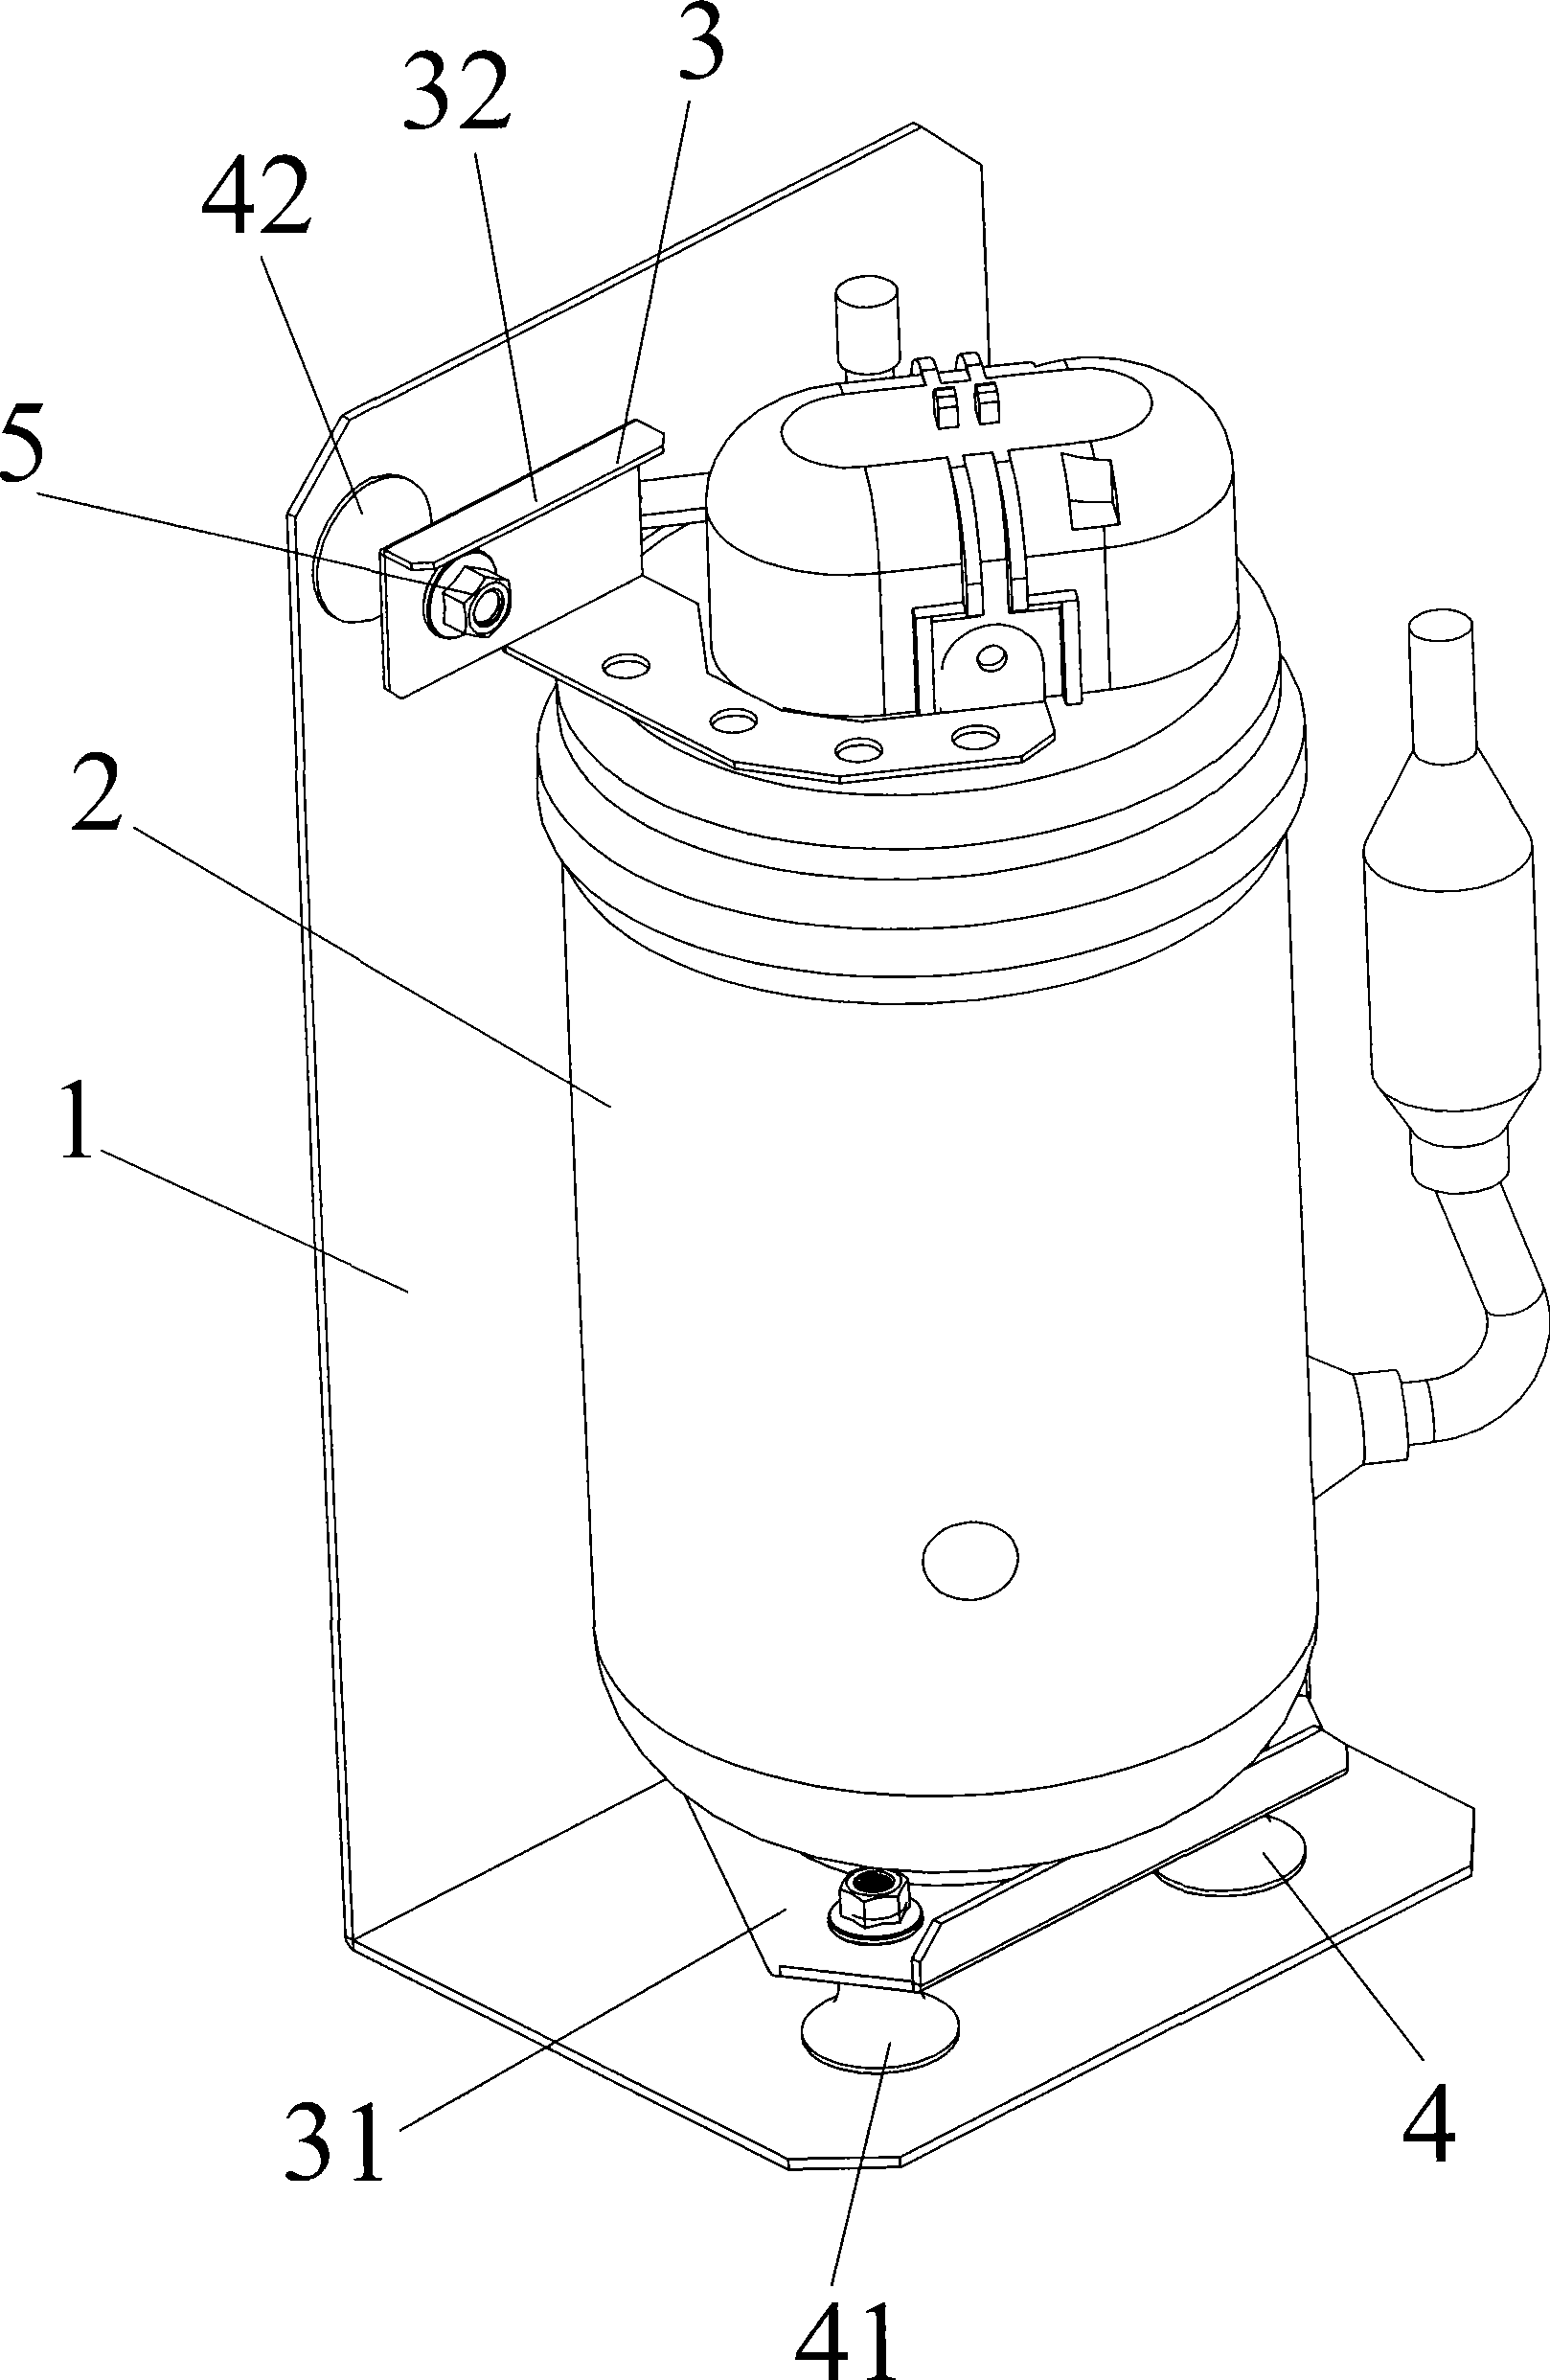 Shock absorber of air-conditioned compressor